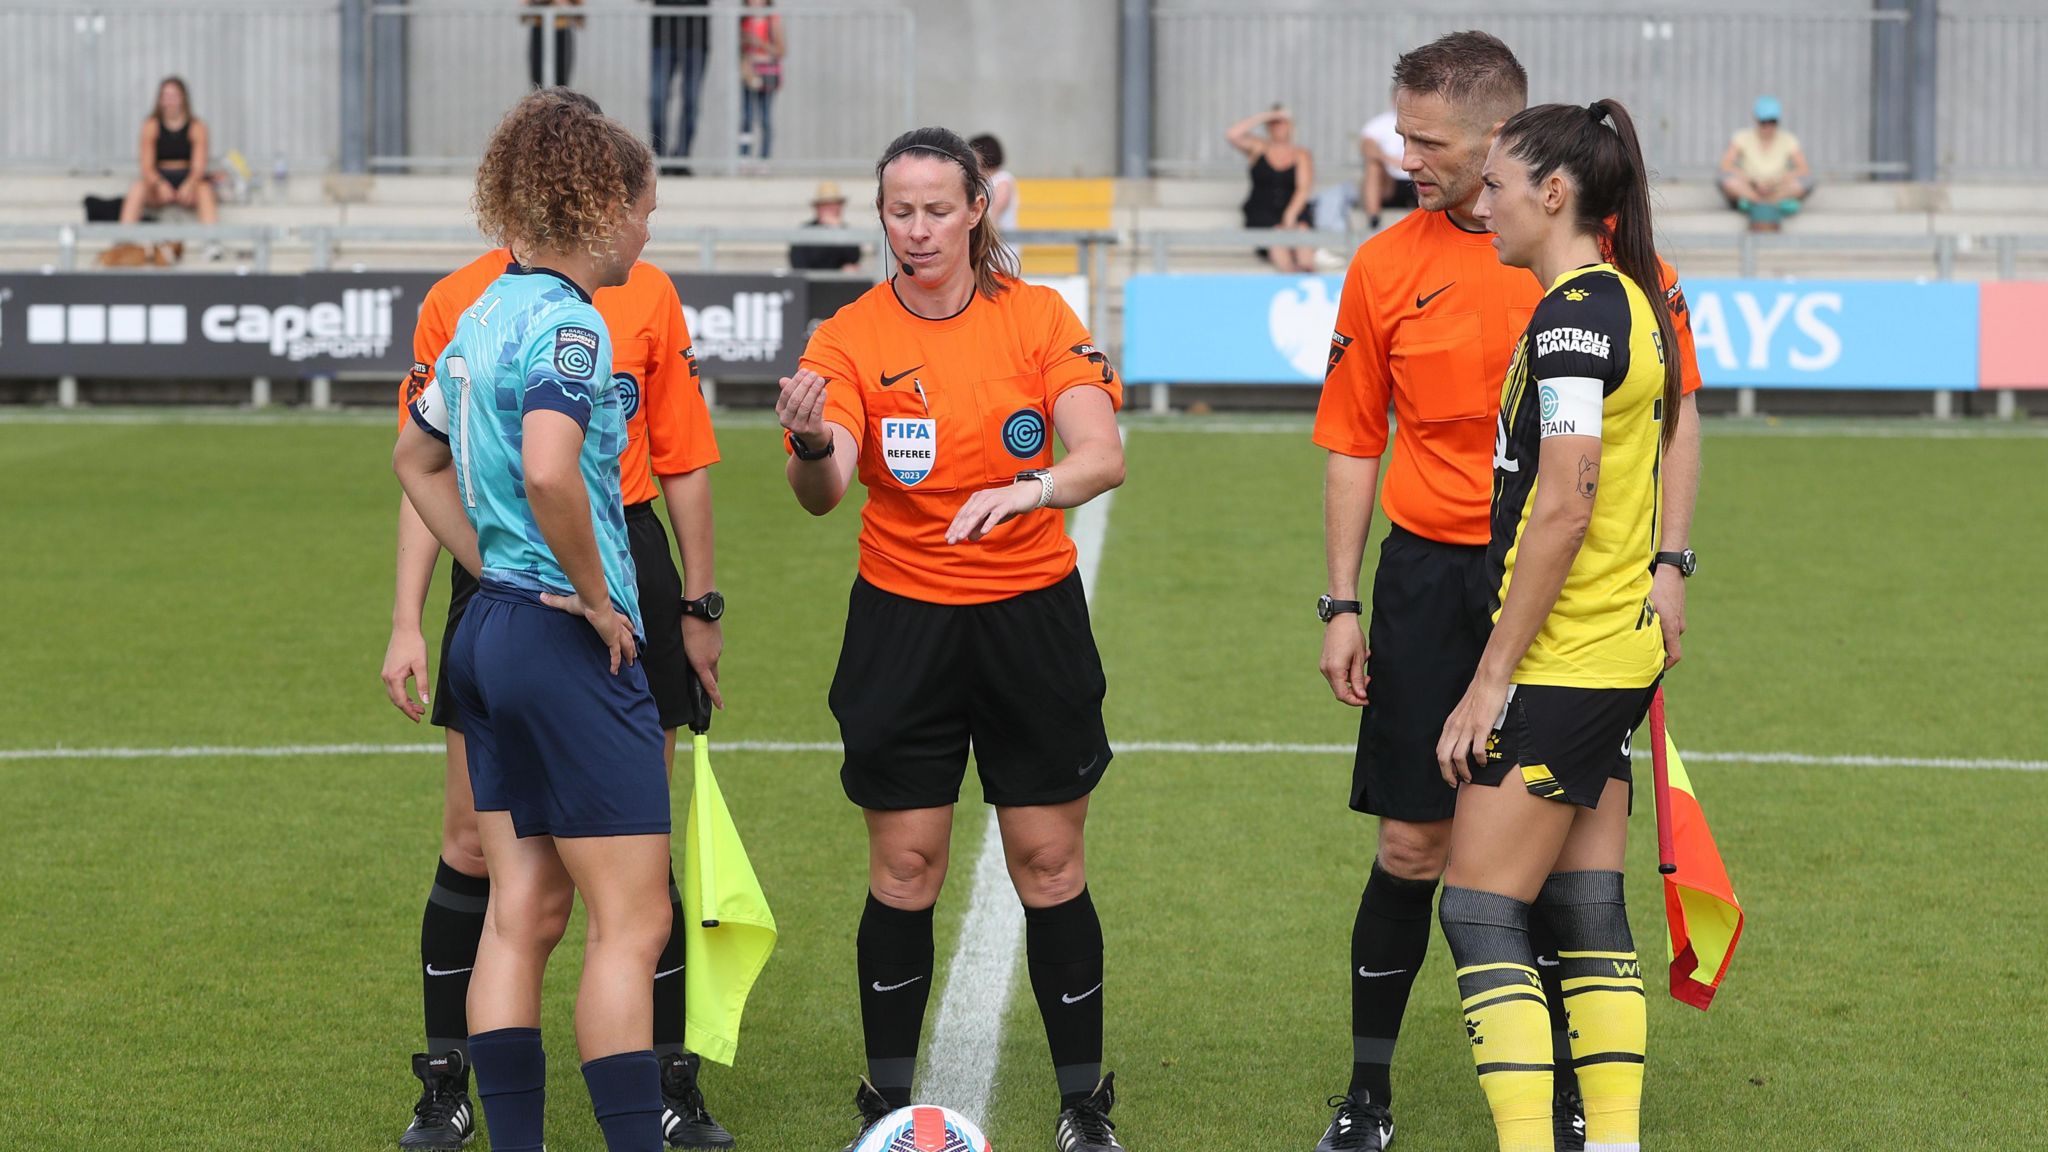 Ms Pearson tossing a coin ahead of a game